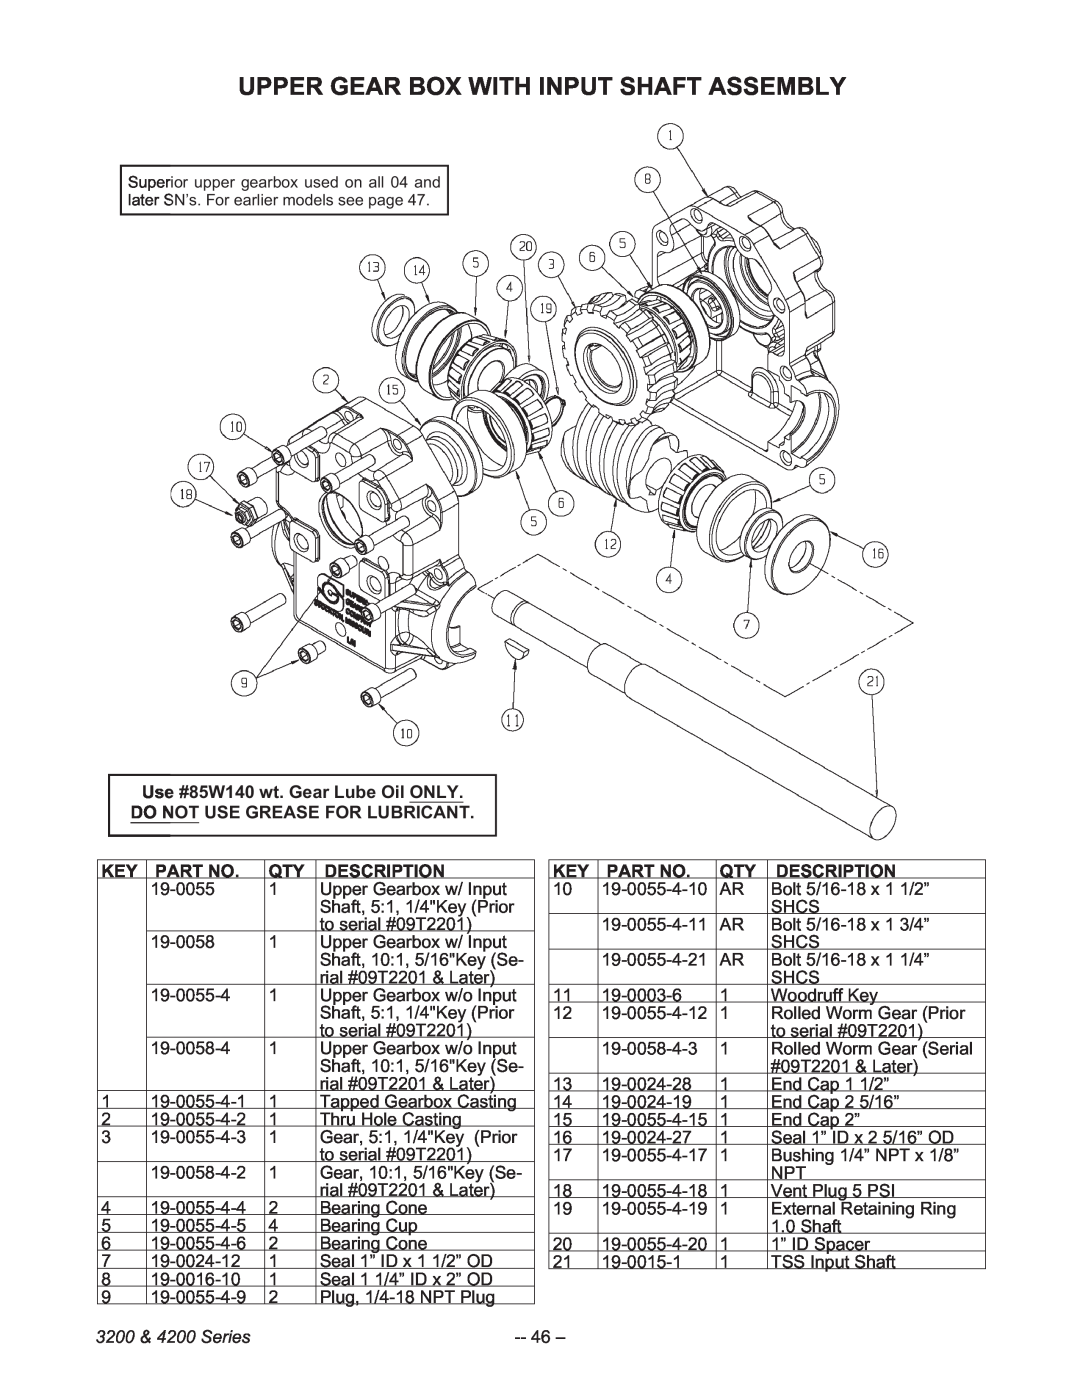 Meyer 4218, 4220, 3220, 3216, 4216, 3218, 4222 manual Upper Gear Box With Input Shaft Assembly, 46, 3200 & 4200 Series 